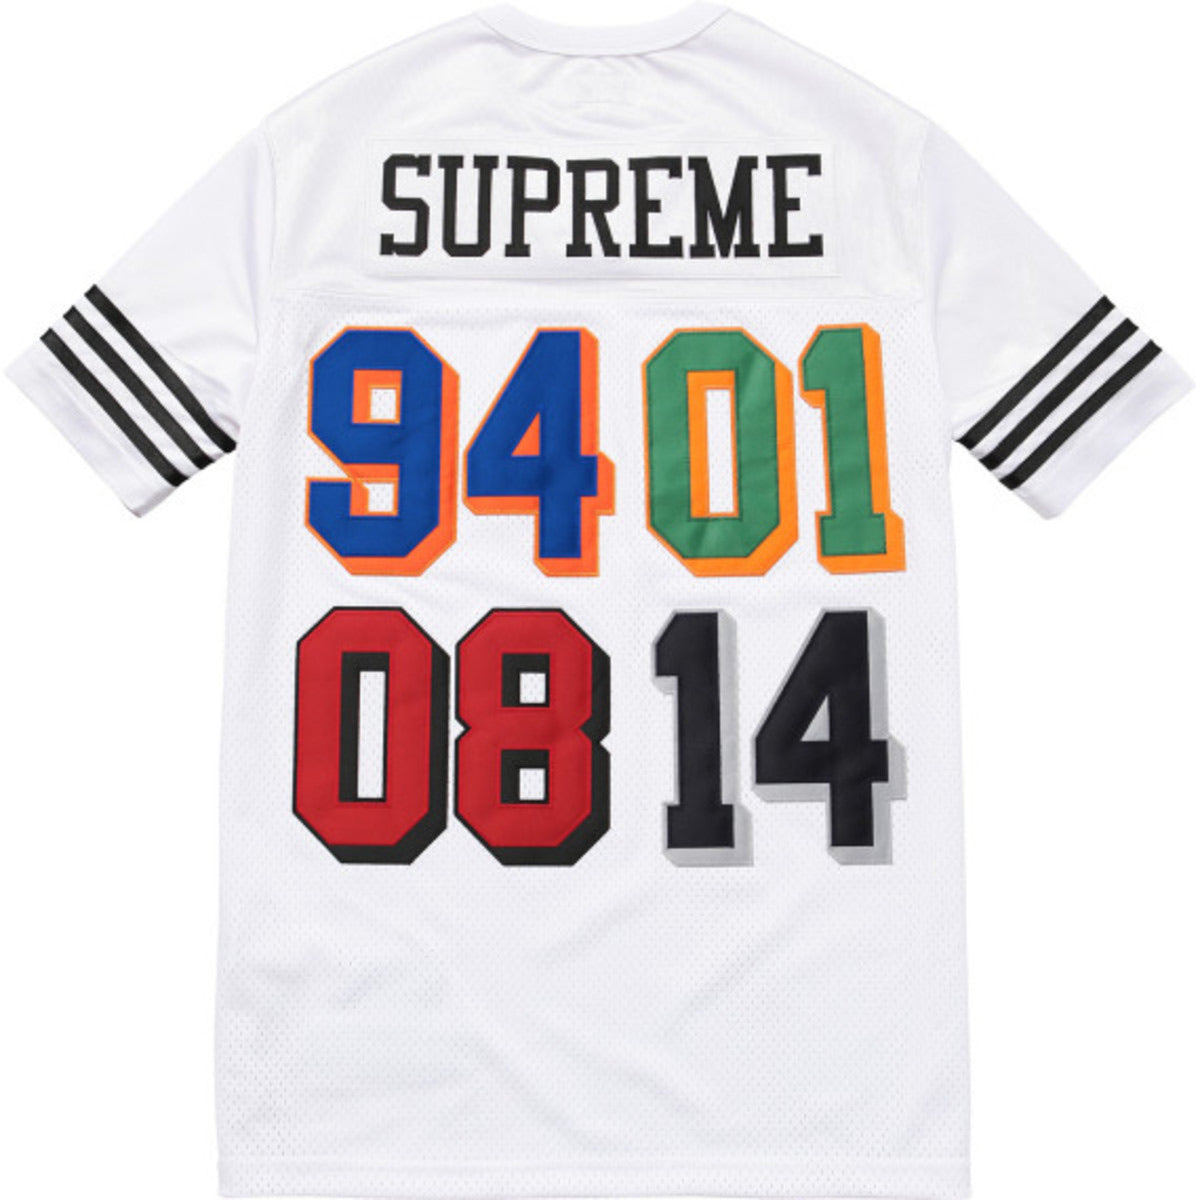 Supreme White Football jersey - Centrall Online